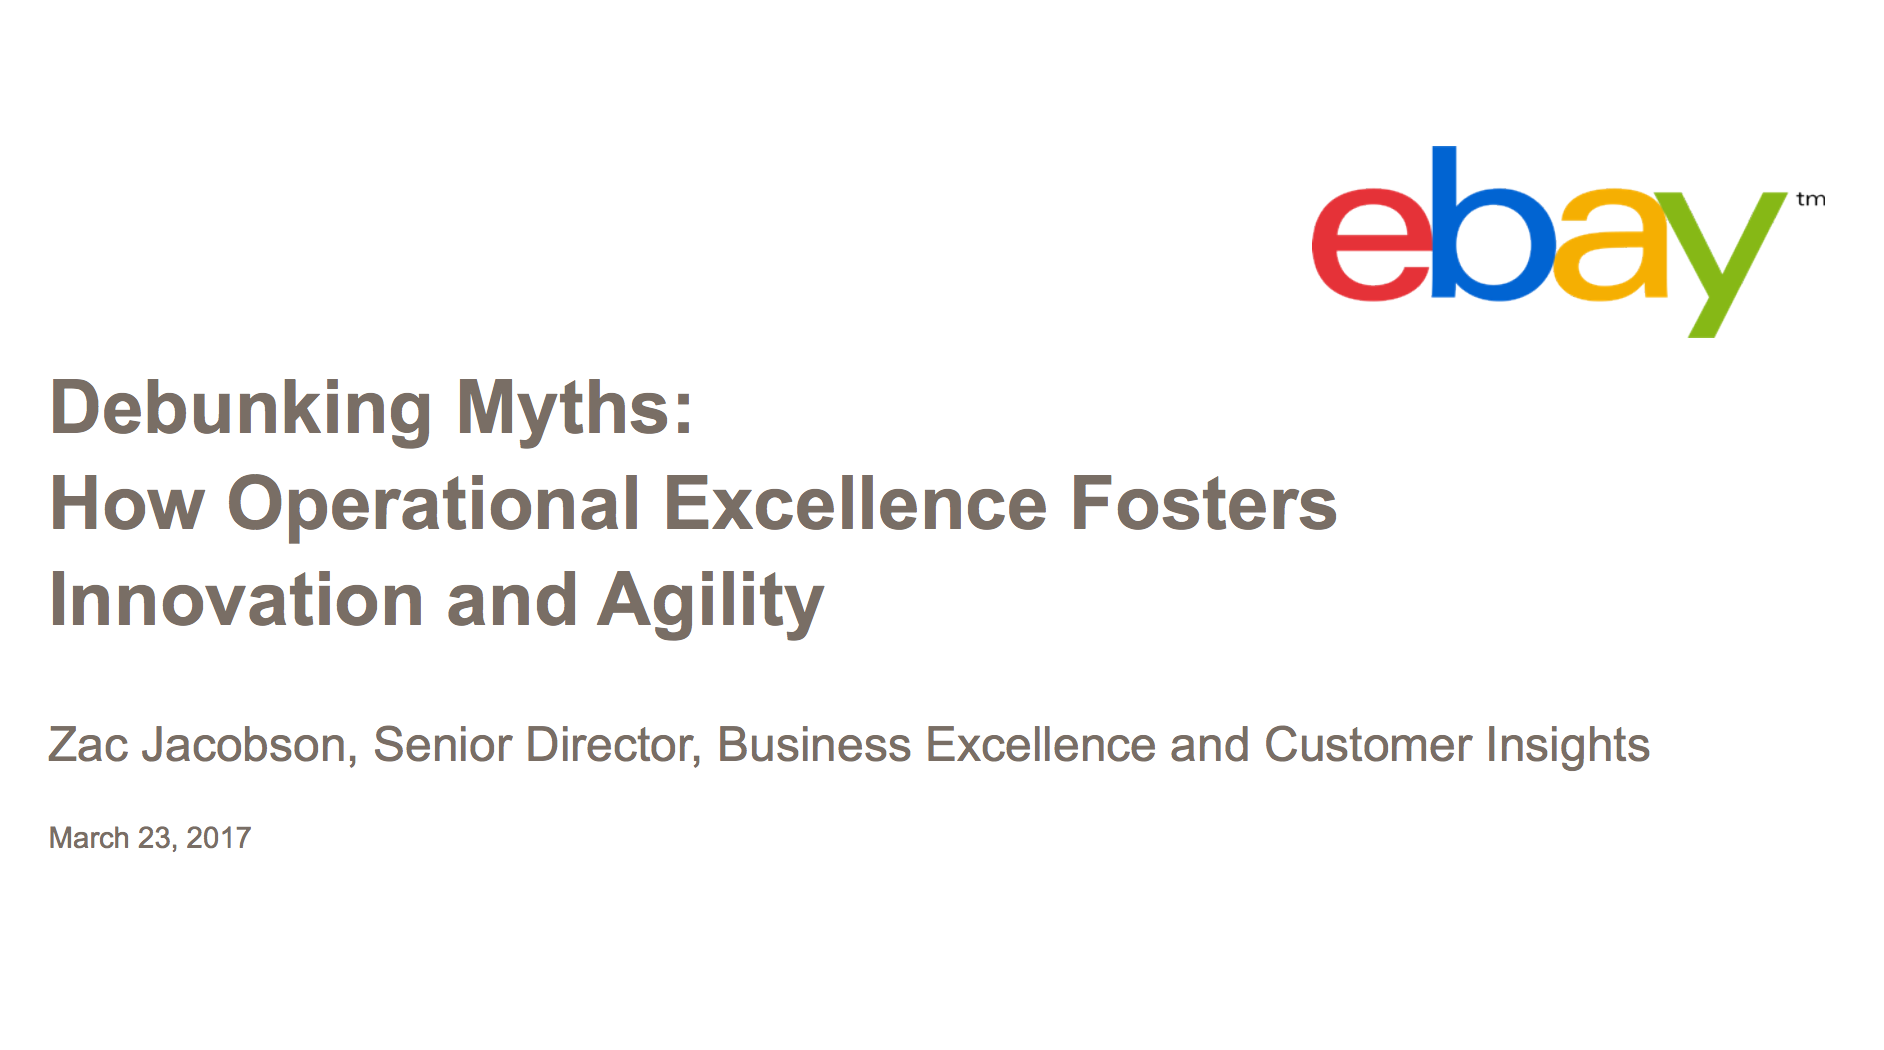 Debunking Myths: How Operational Excellence Forsters Innovation & Agility